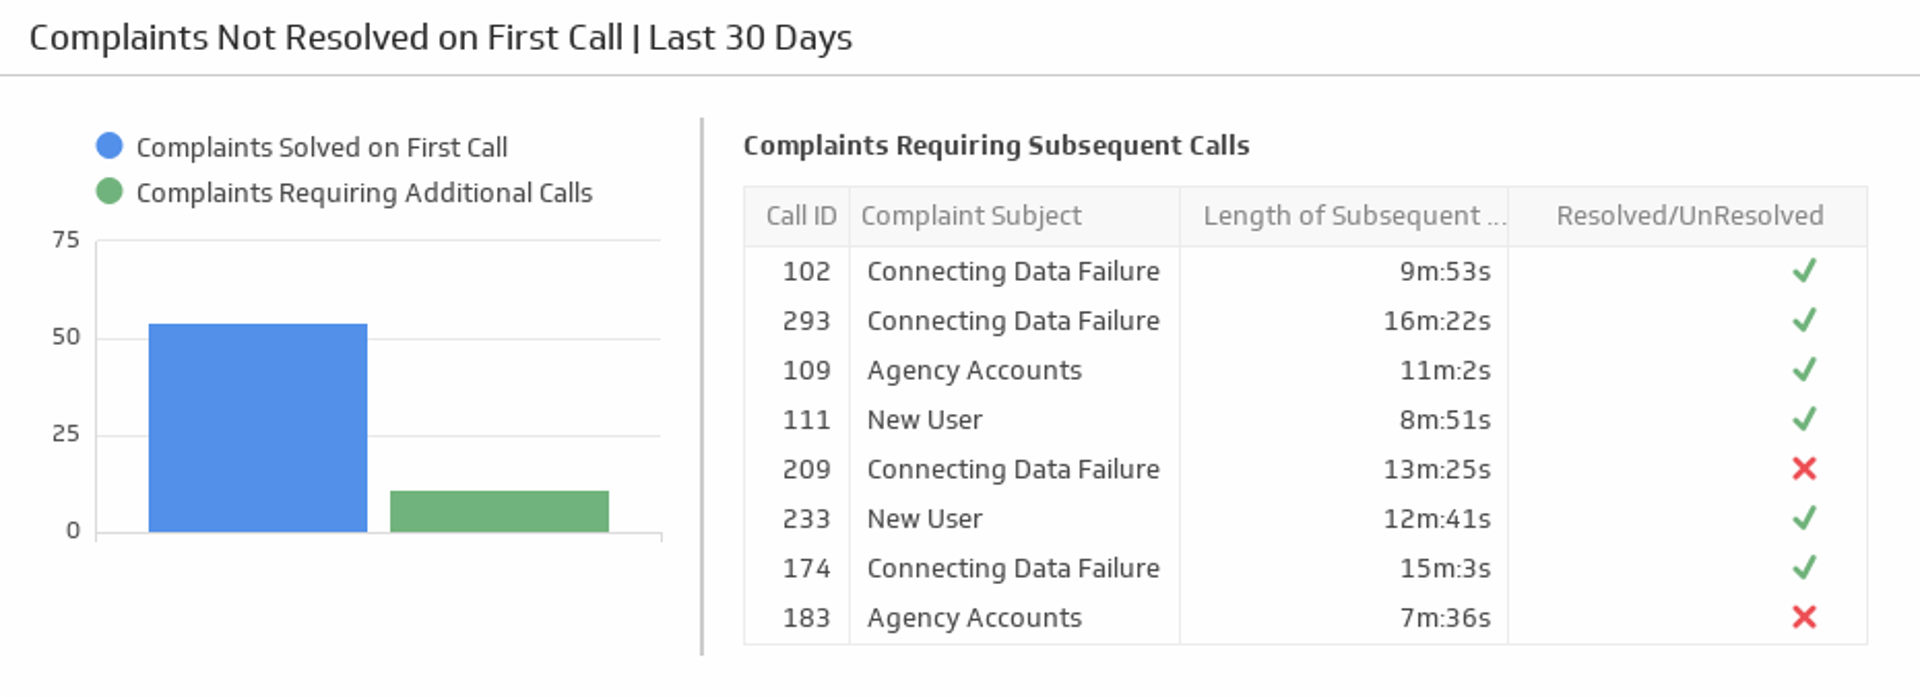 Related KPI Examples - Complaints Not Resolved on First Call Metric